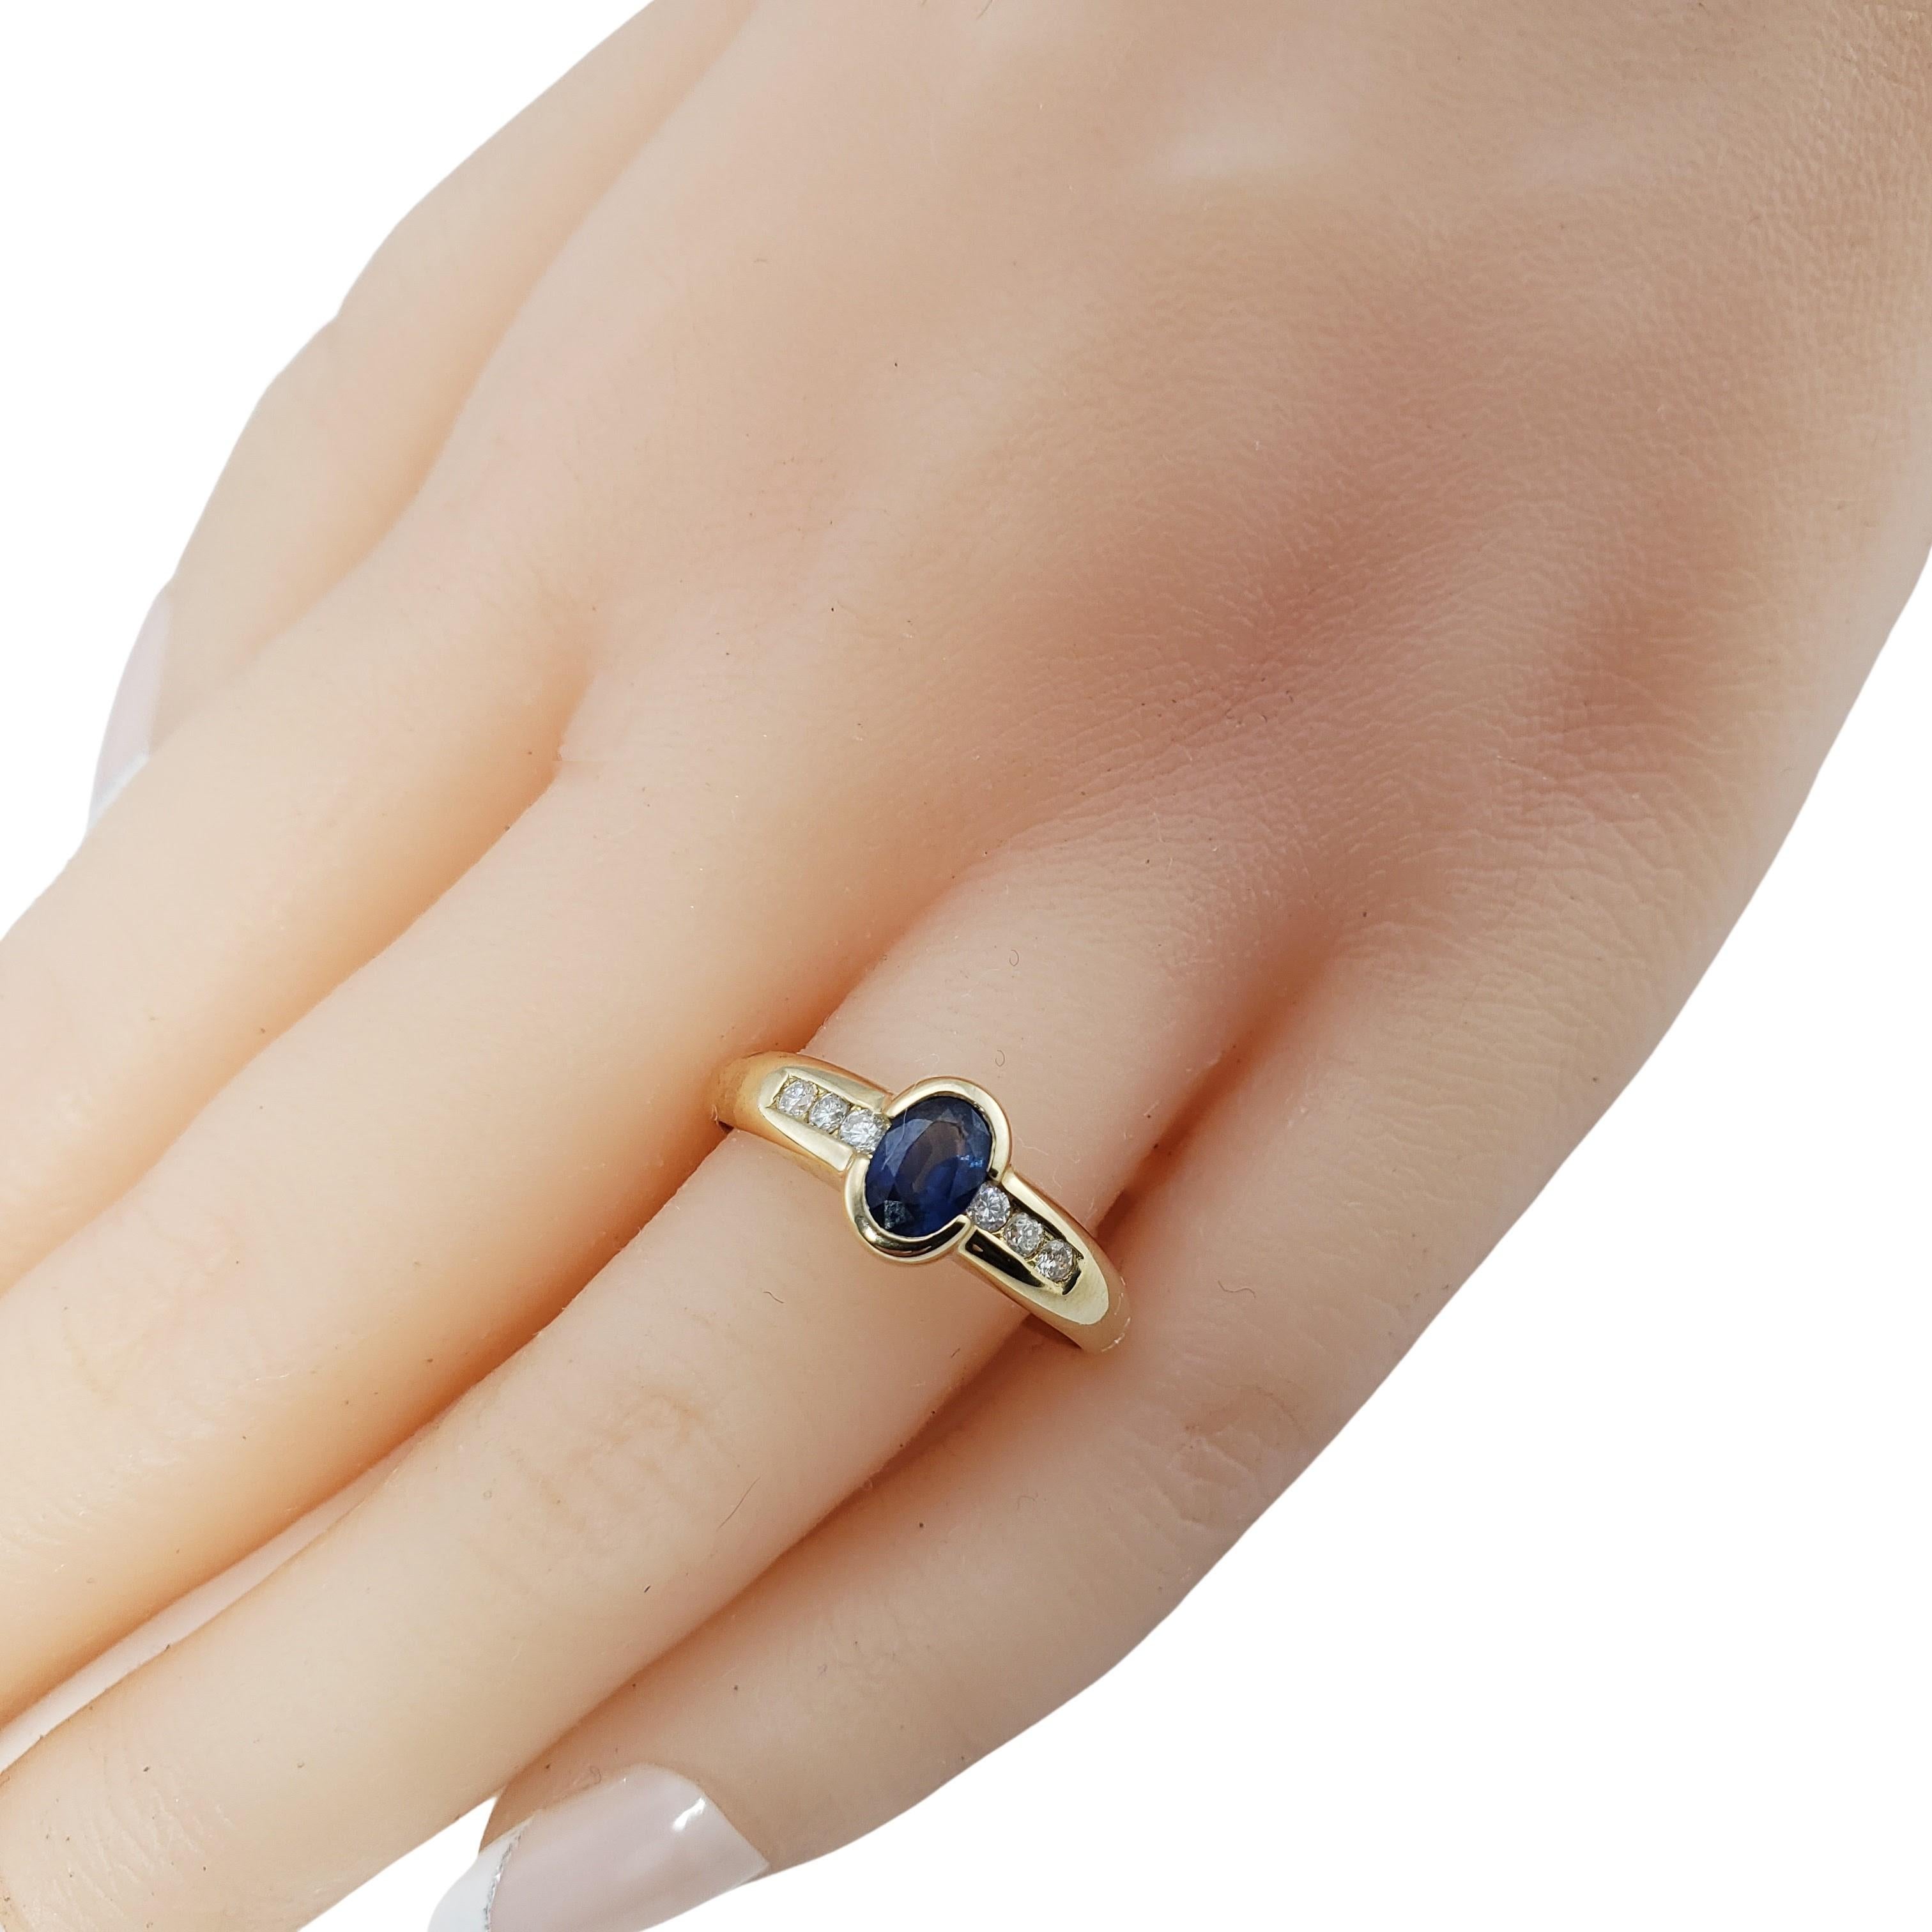 Vintage 18 Karat Yellow Gold Sapphire and Diamond Ring Size 8.5-

This lovely ring features one oval sapphire (7 mm x 5 mm) and six round brilliant cut diamonds set in classic 18K yellow gold.
Shank: 2 mm.

Approximate total diamond weight: .12